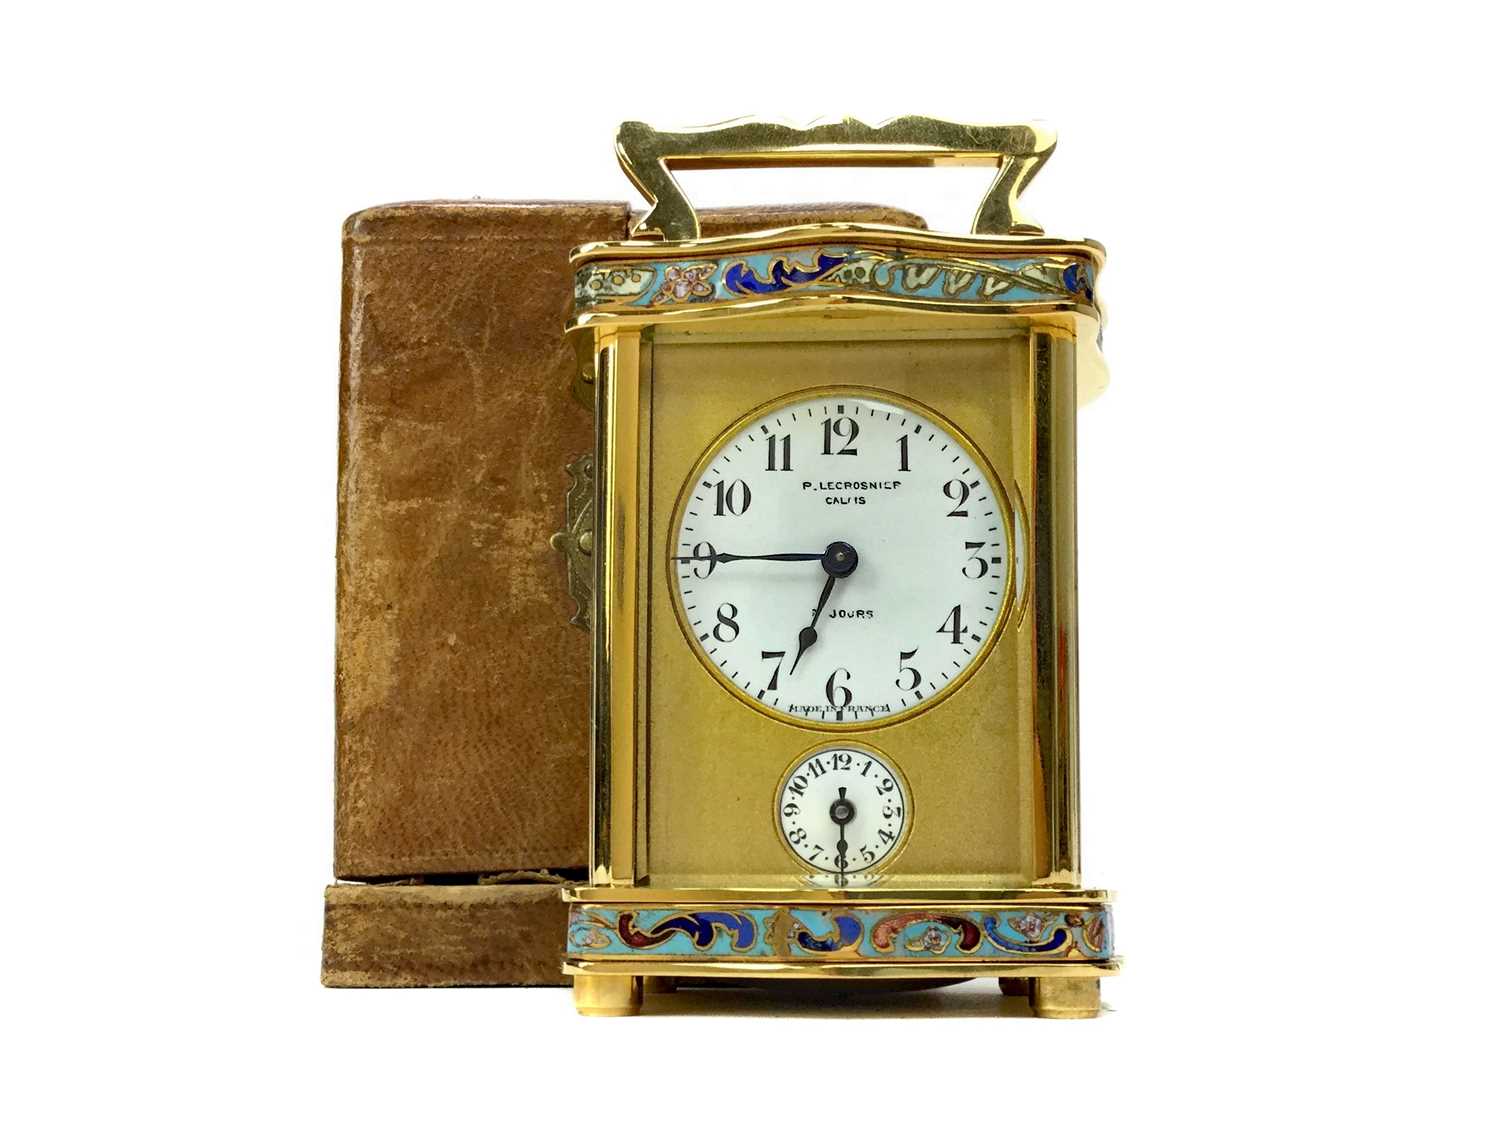 Lot 1110 - A LATE 19TH CENTURY FRENCH CHAMPLEVE ENAMEL TRAVELLING TIMEPIECE